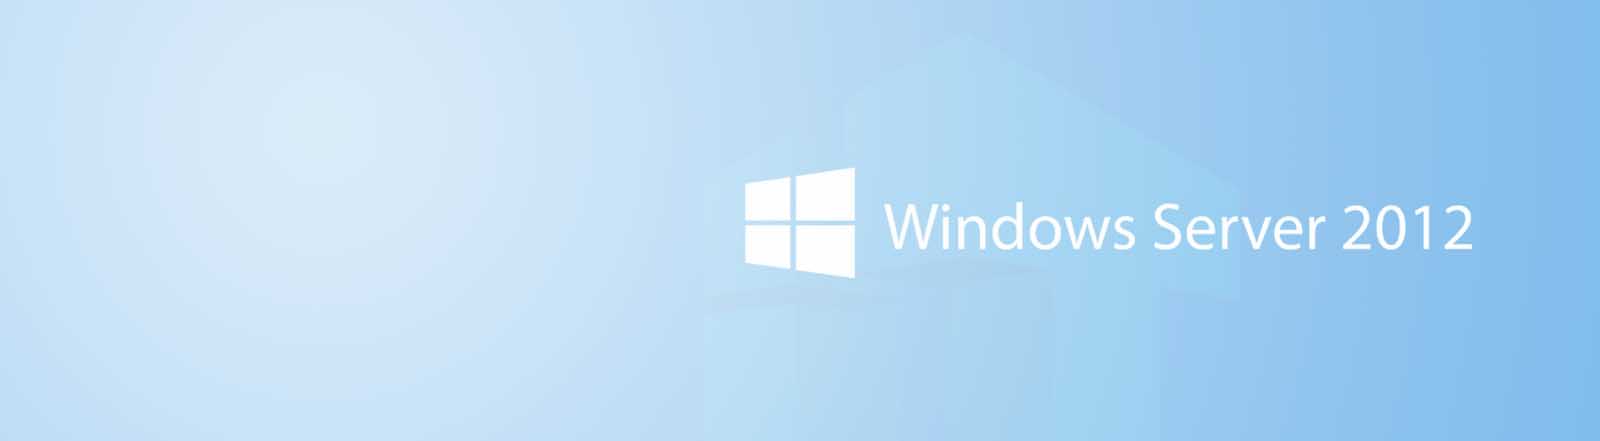 The end of Windows Server 2012 technical support